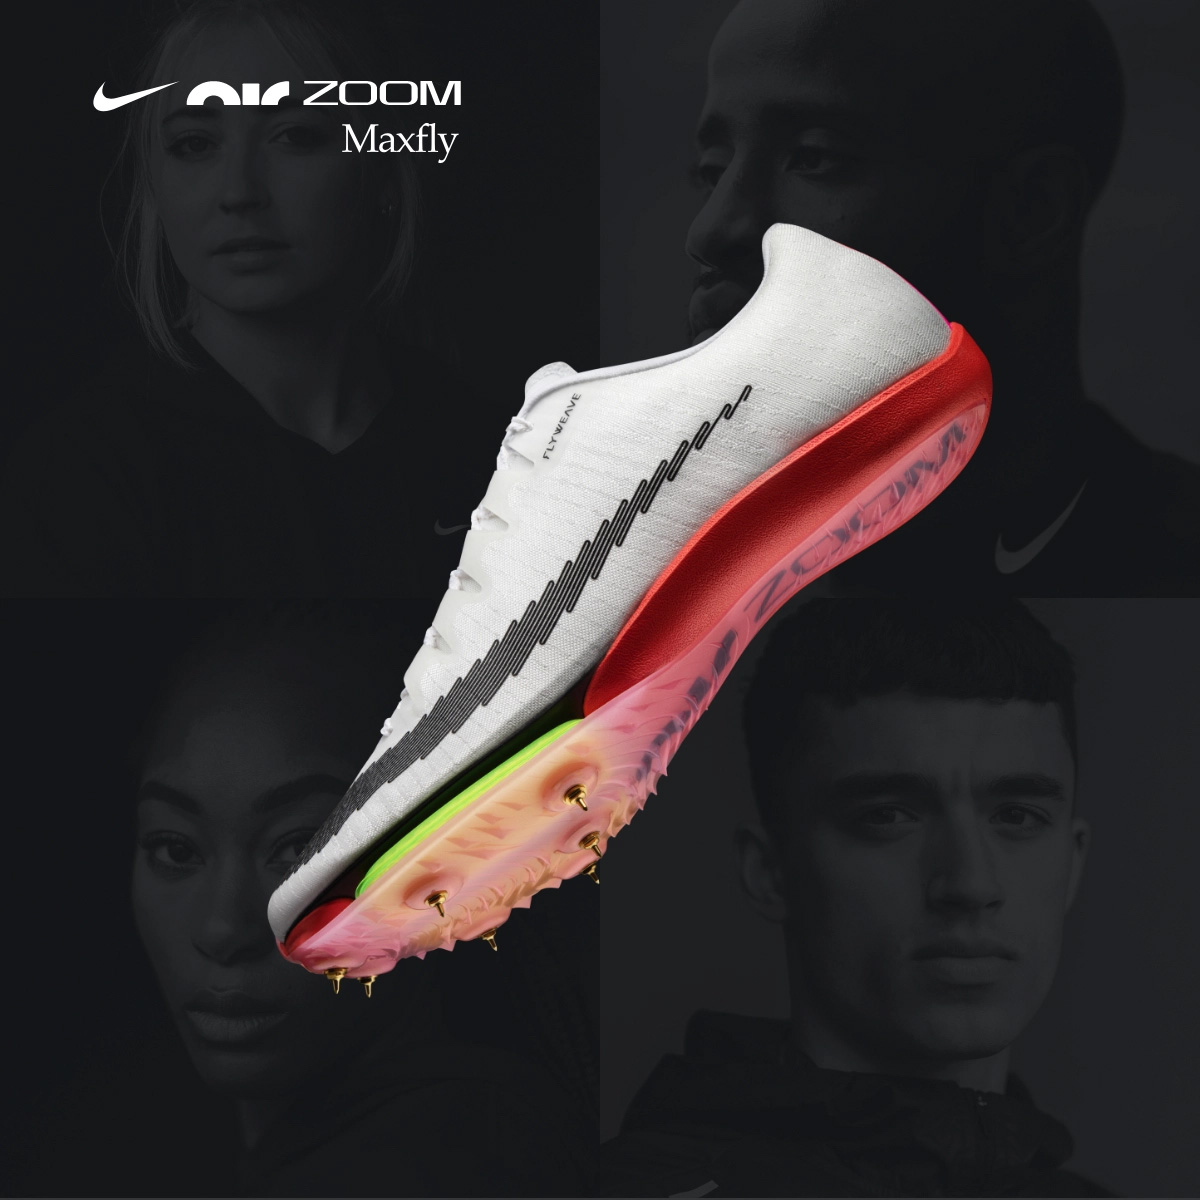 Nike Air Zoom Maxfly Running Spikes | SportsShoes.com